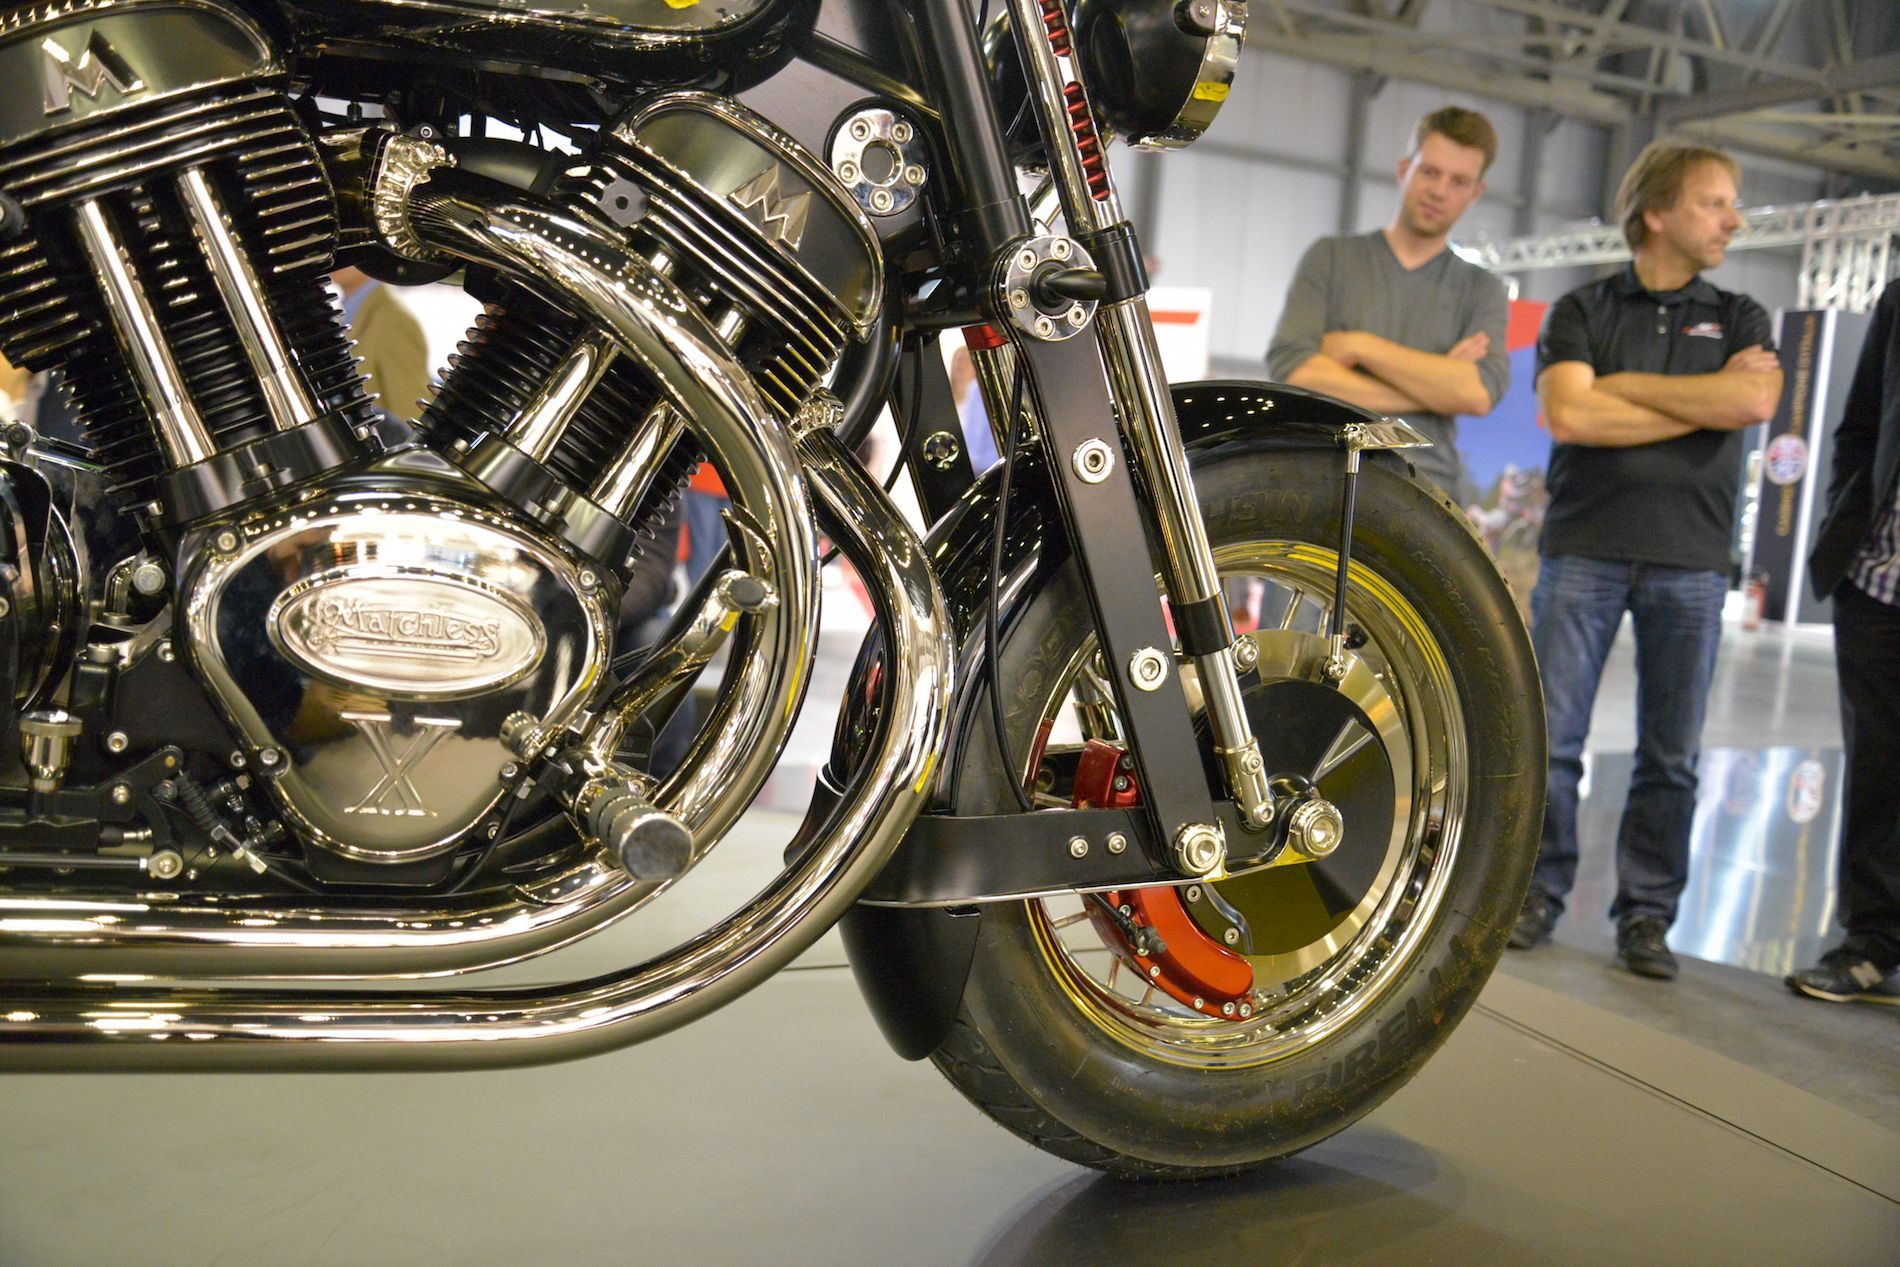 Matchless - Front disc is made to look like a drum brake